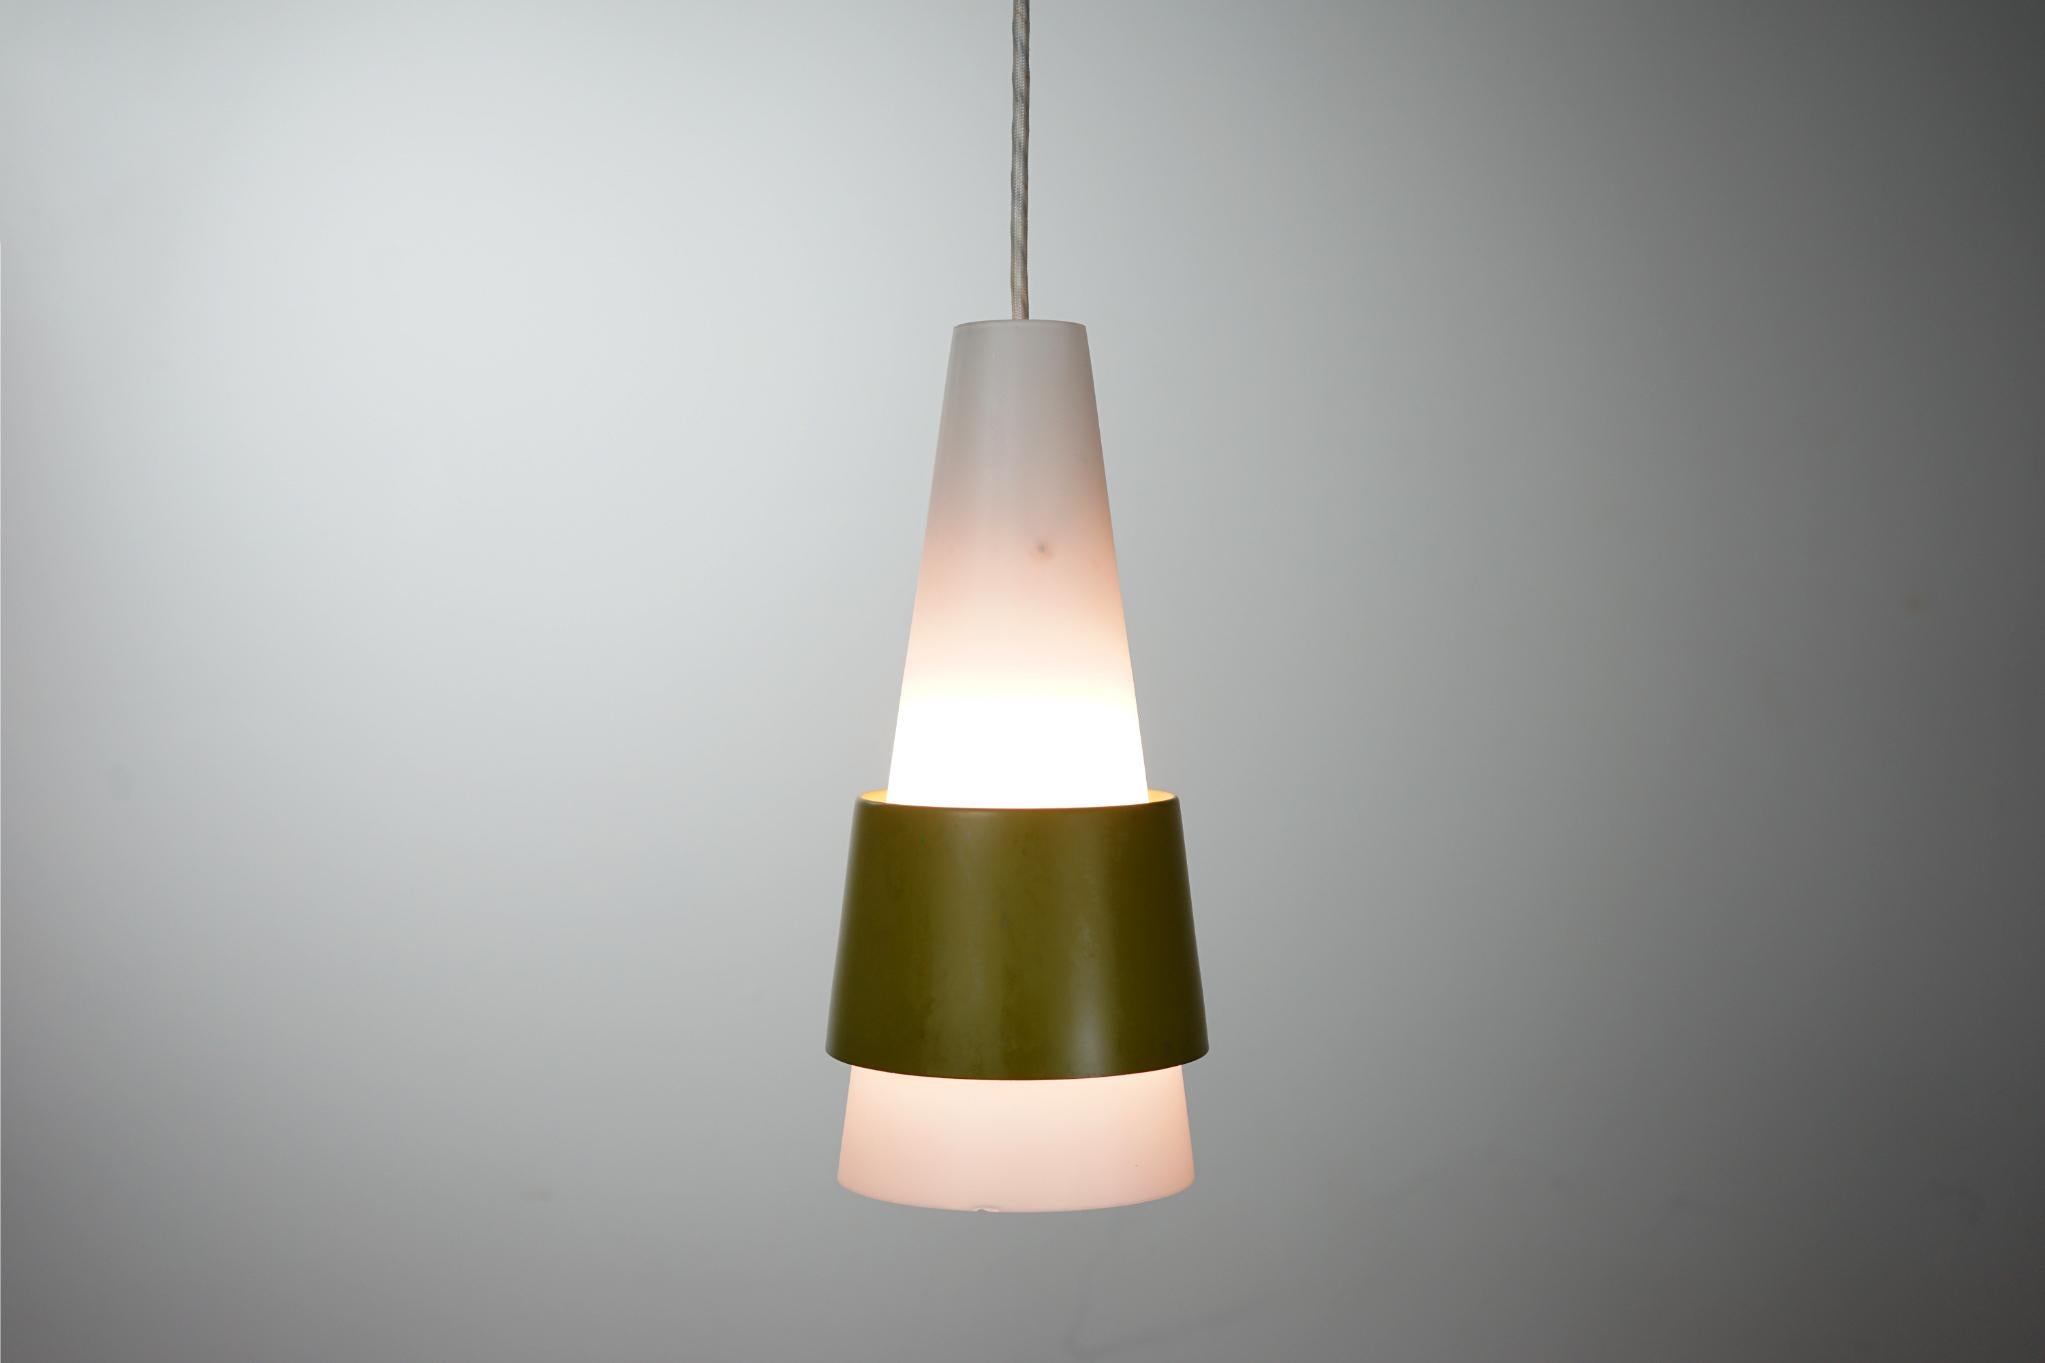 Glass and metal Danish pendant light, circa 1960's. Light consists of a slim frosted glass cone shaped shade with avocado green metal band.

Original condition, bottom rim shows tiny chip, selling as-is.

Please inquire for international and remote